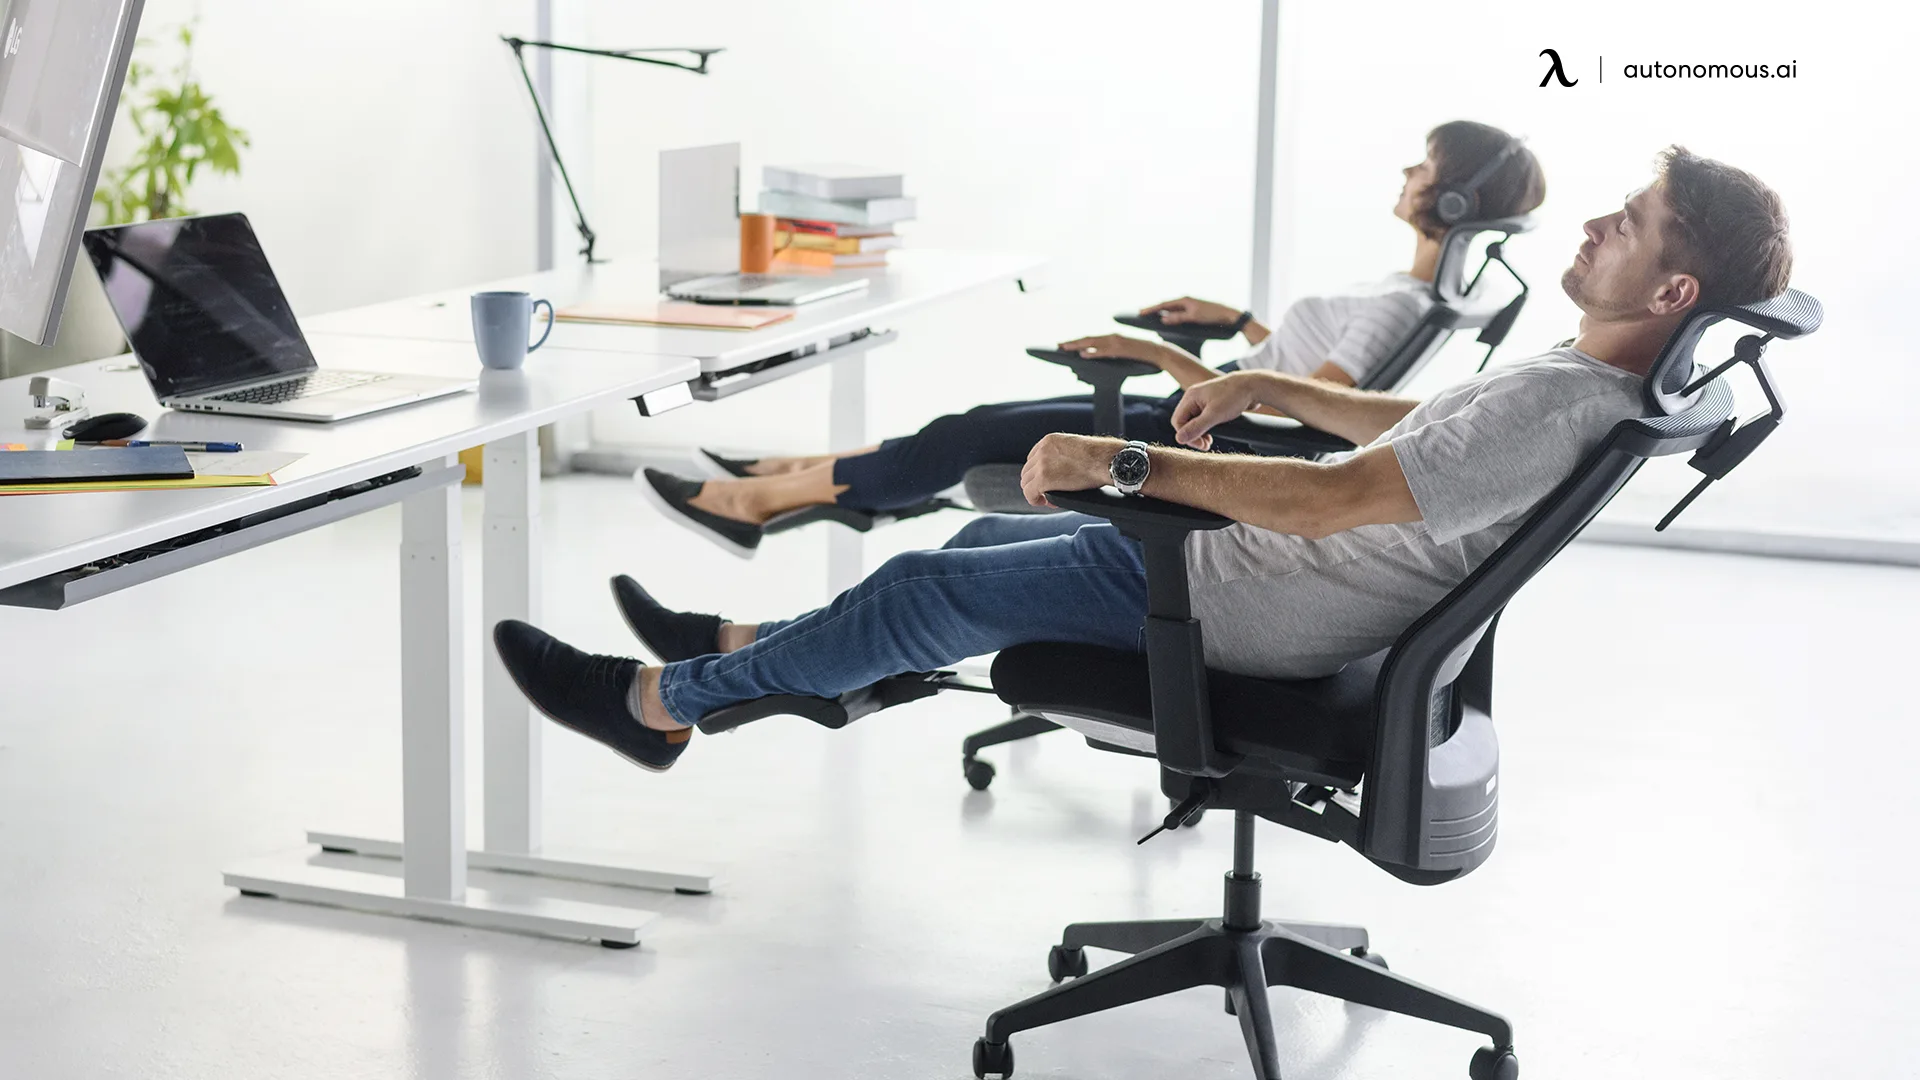 The Best Lean Back Office Chair for Back Rest